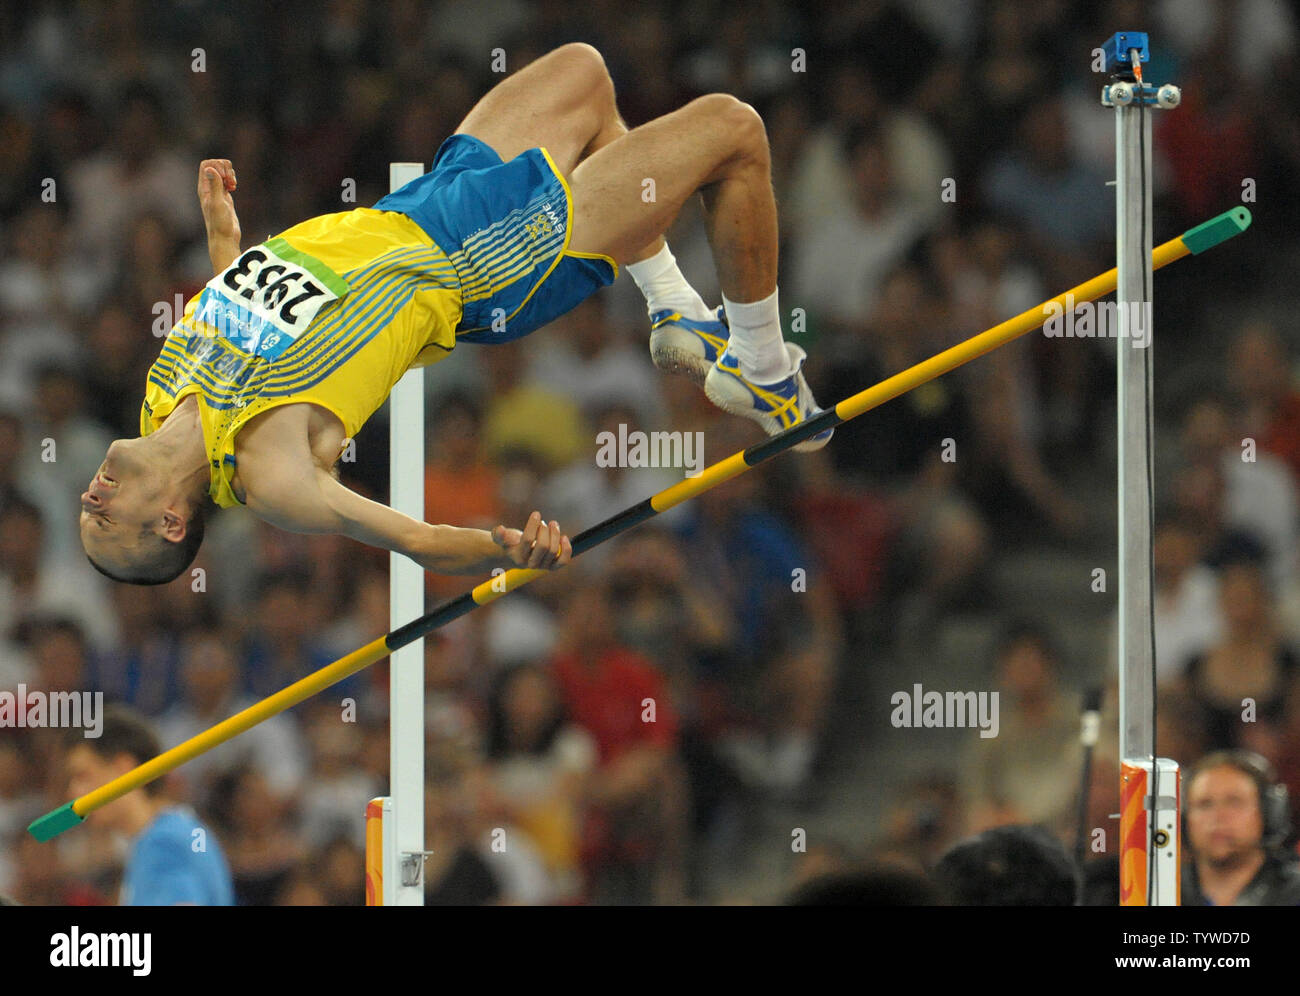 Sweden's Stefan Holm misses the mark during the Men's High Jump at the  National Stadium (Bird's Nest) during the 2008 Summer Olympics in Beijing  on August 19, 2008. Holm placed fourth. (UPI